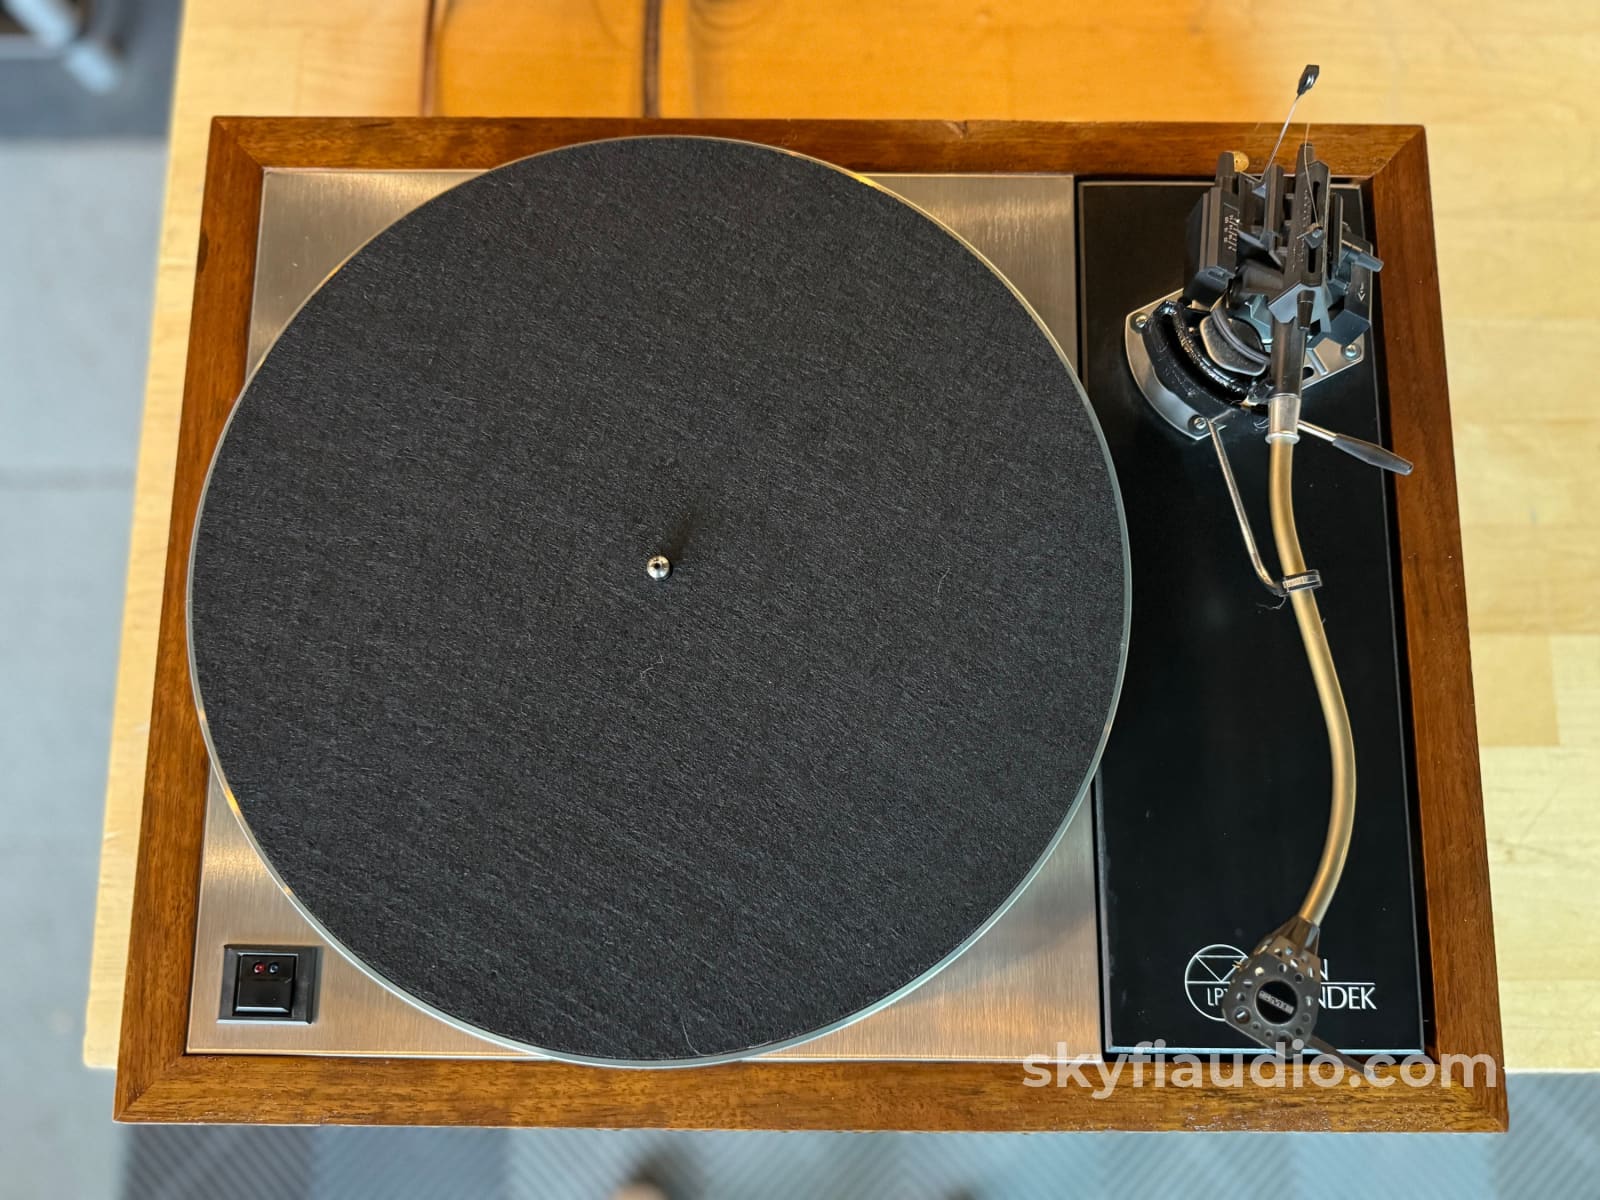 Linn Lp12 Vintage Turntable With Upgrades And Sme Tonearm